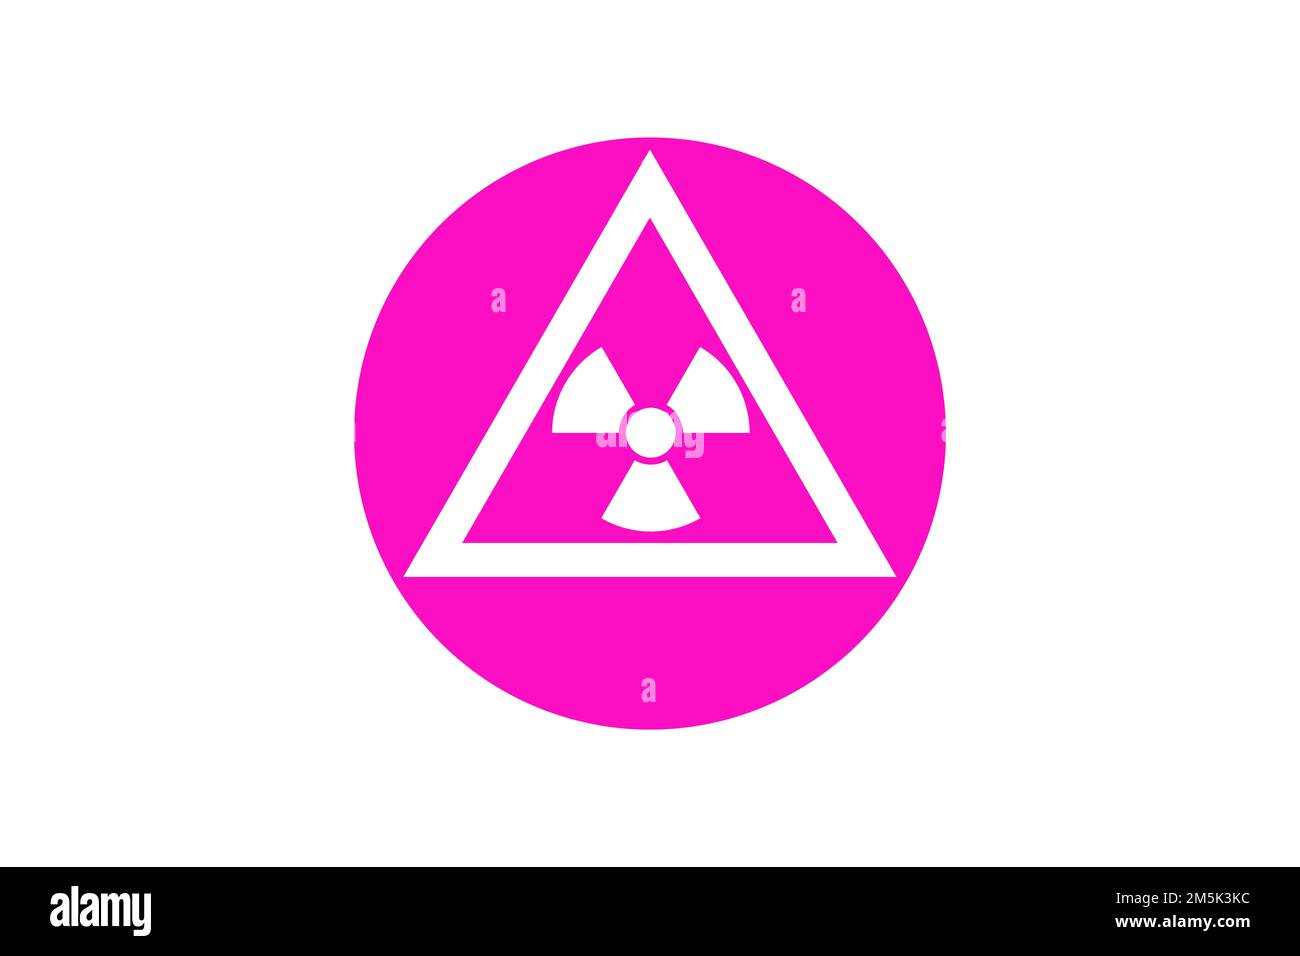 radiation symbol used for nuclear material, danger symbol for radioactive material or areas. Radioactivity symbol in circle with high visibility color Stock Photo